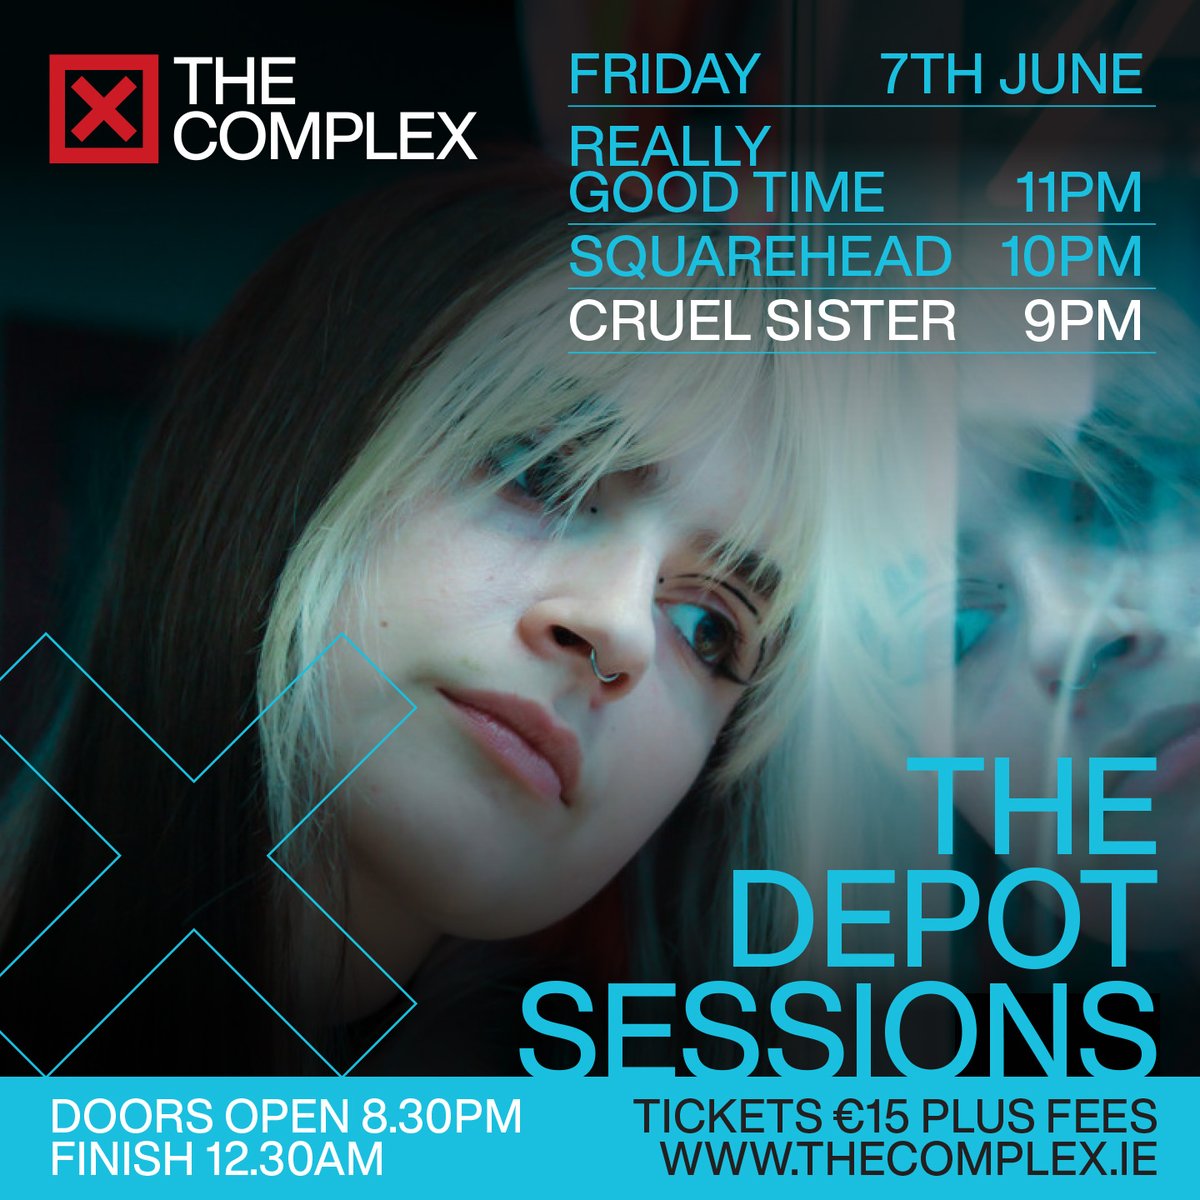 MUSIC @ THE DEPOT Dublin-based act Cruel Sister will perform on 7 June as part of The Depot Sessions. Book your ticket now at: thecomplex.ie/event/the-depo… @cruelsisterr